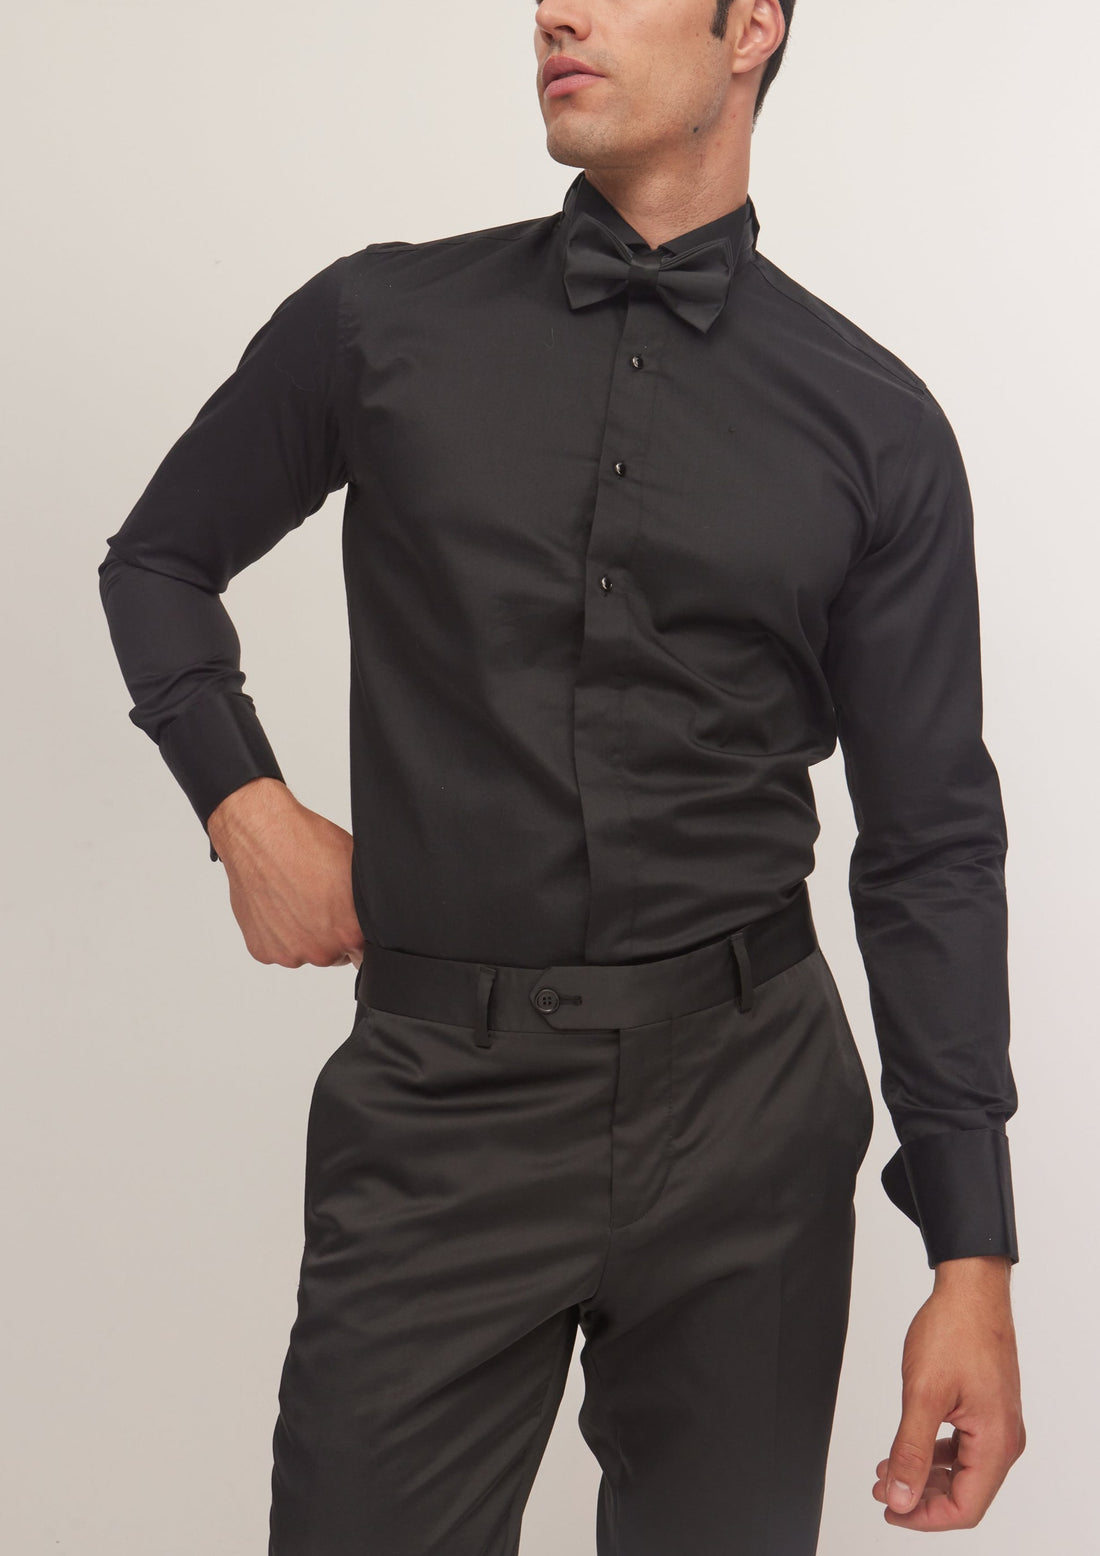 Wing Classical Top  Front Stud Tuxedo Shirt - Black